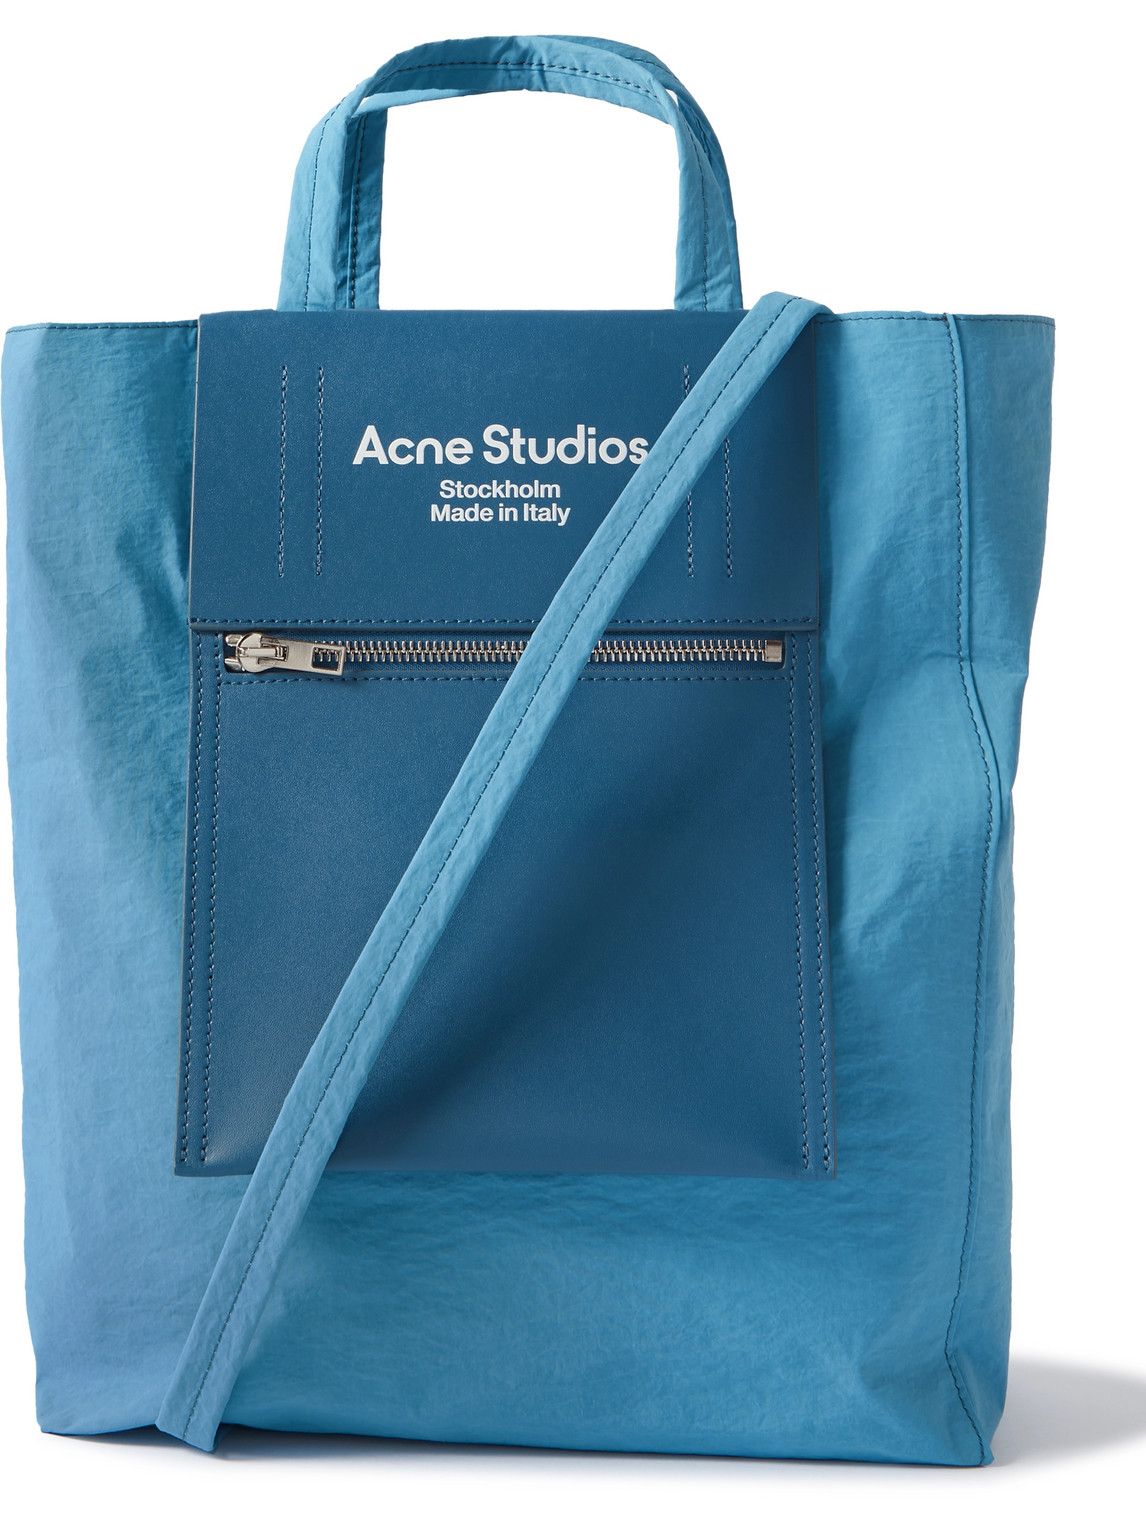 Shell And Printed Leather Tote Bag In Blue